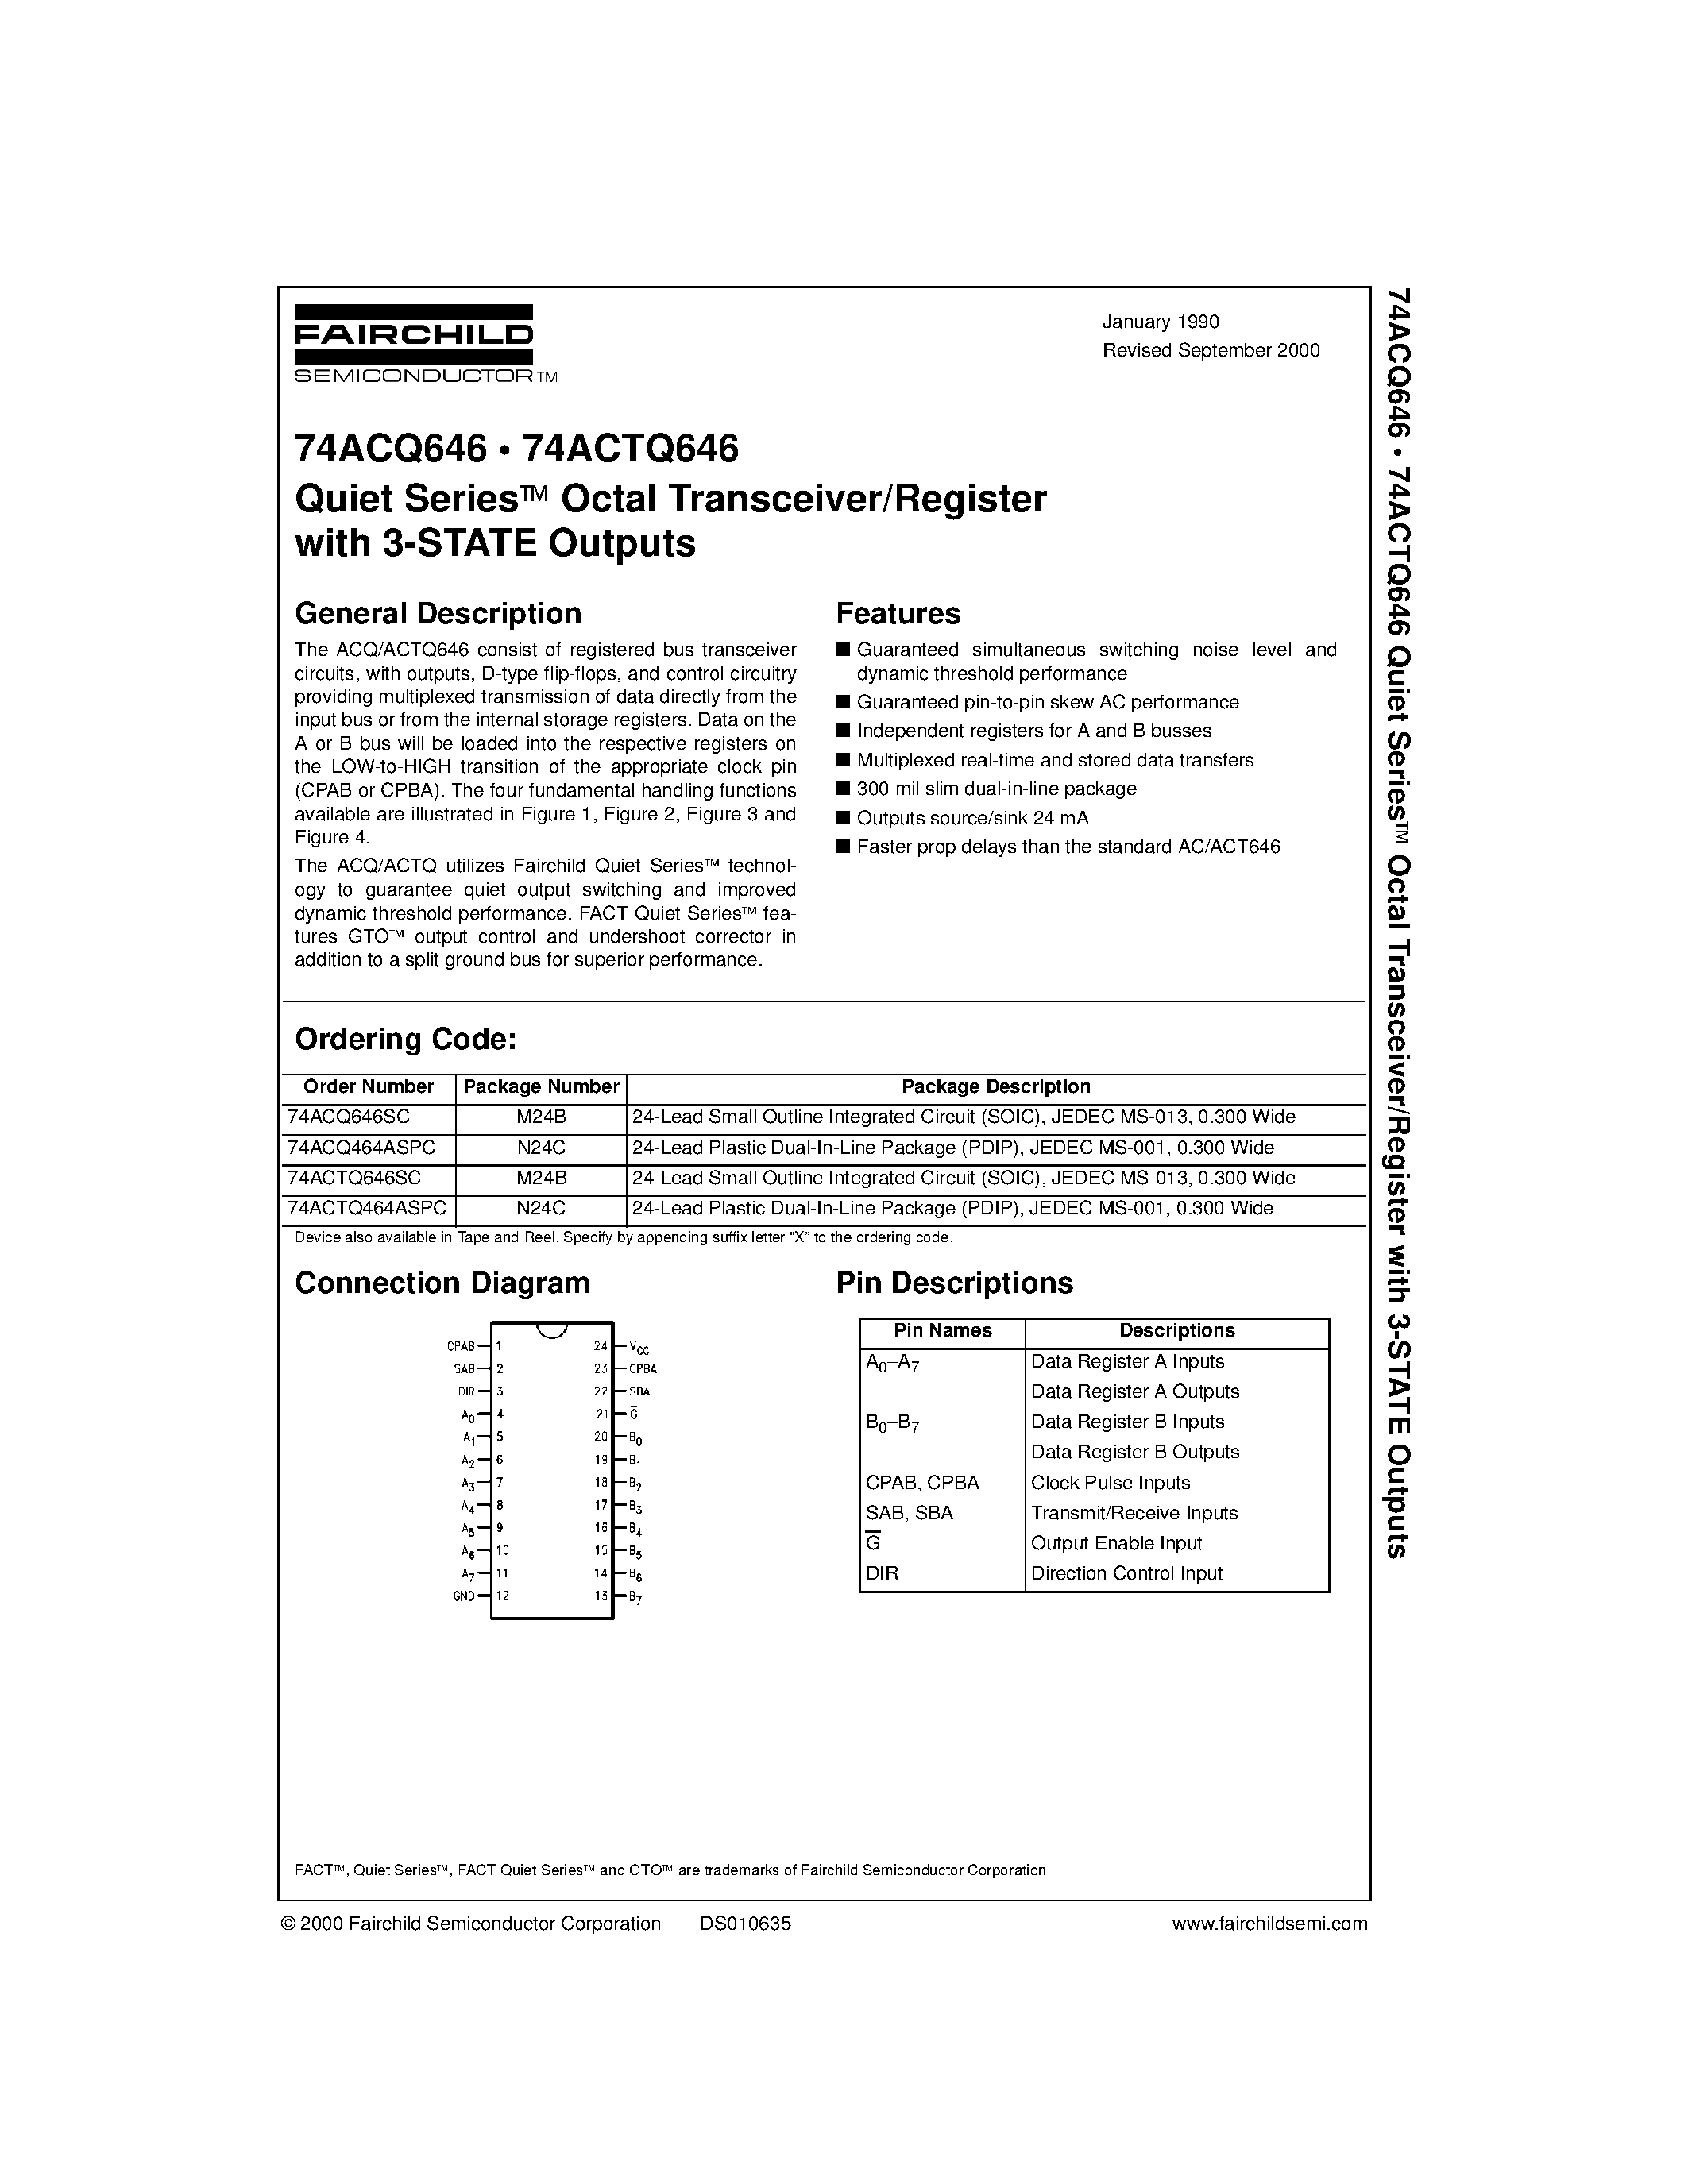 Datasheet 74ACQ646SC - Quiet Series Octal Transceiver/Register with 3-STATE Outputs page 1